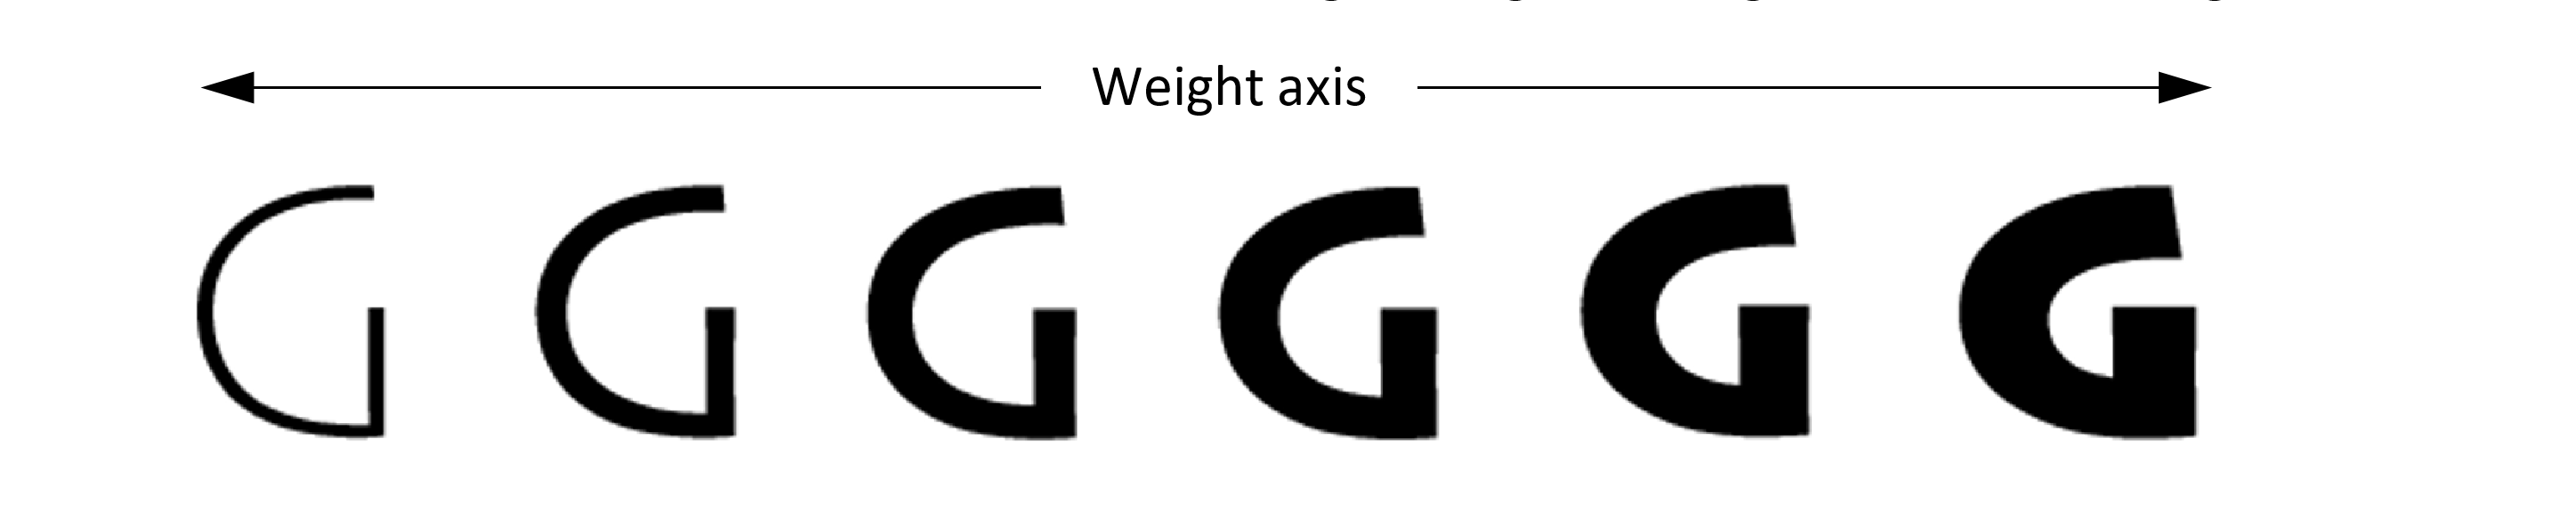 Variations of capital G along a weight axis